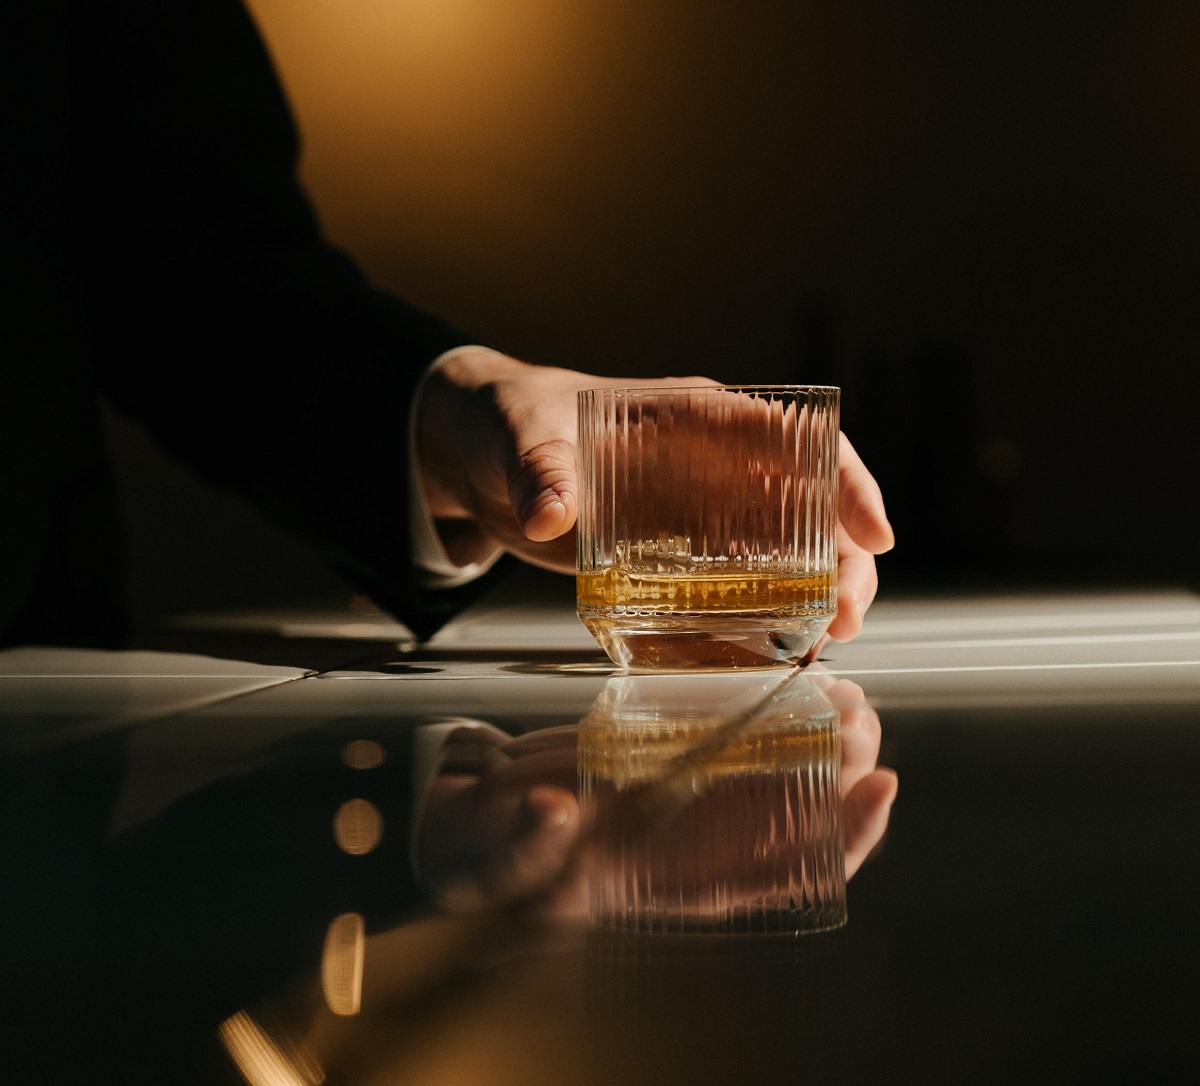 A whisky-tasting journey can be your next exclusive hosting idea